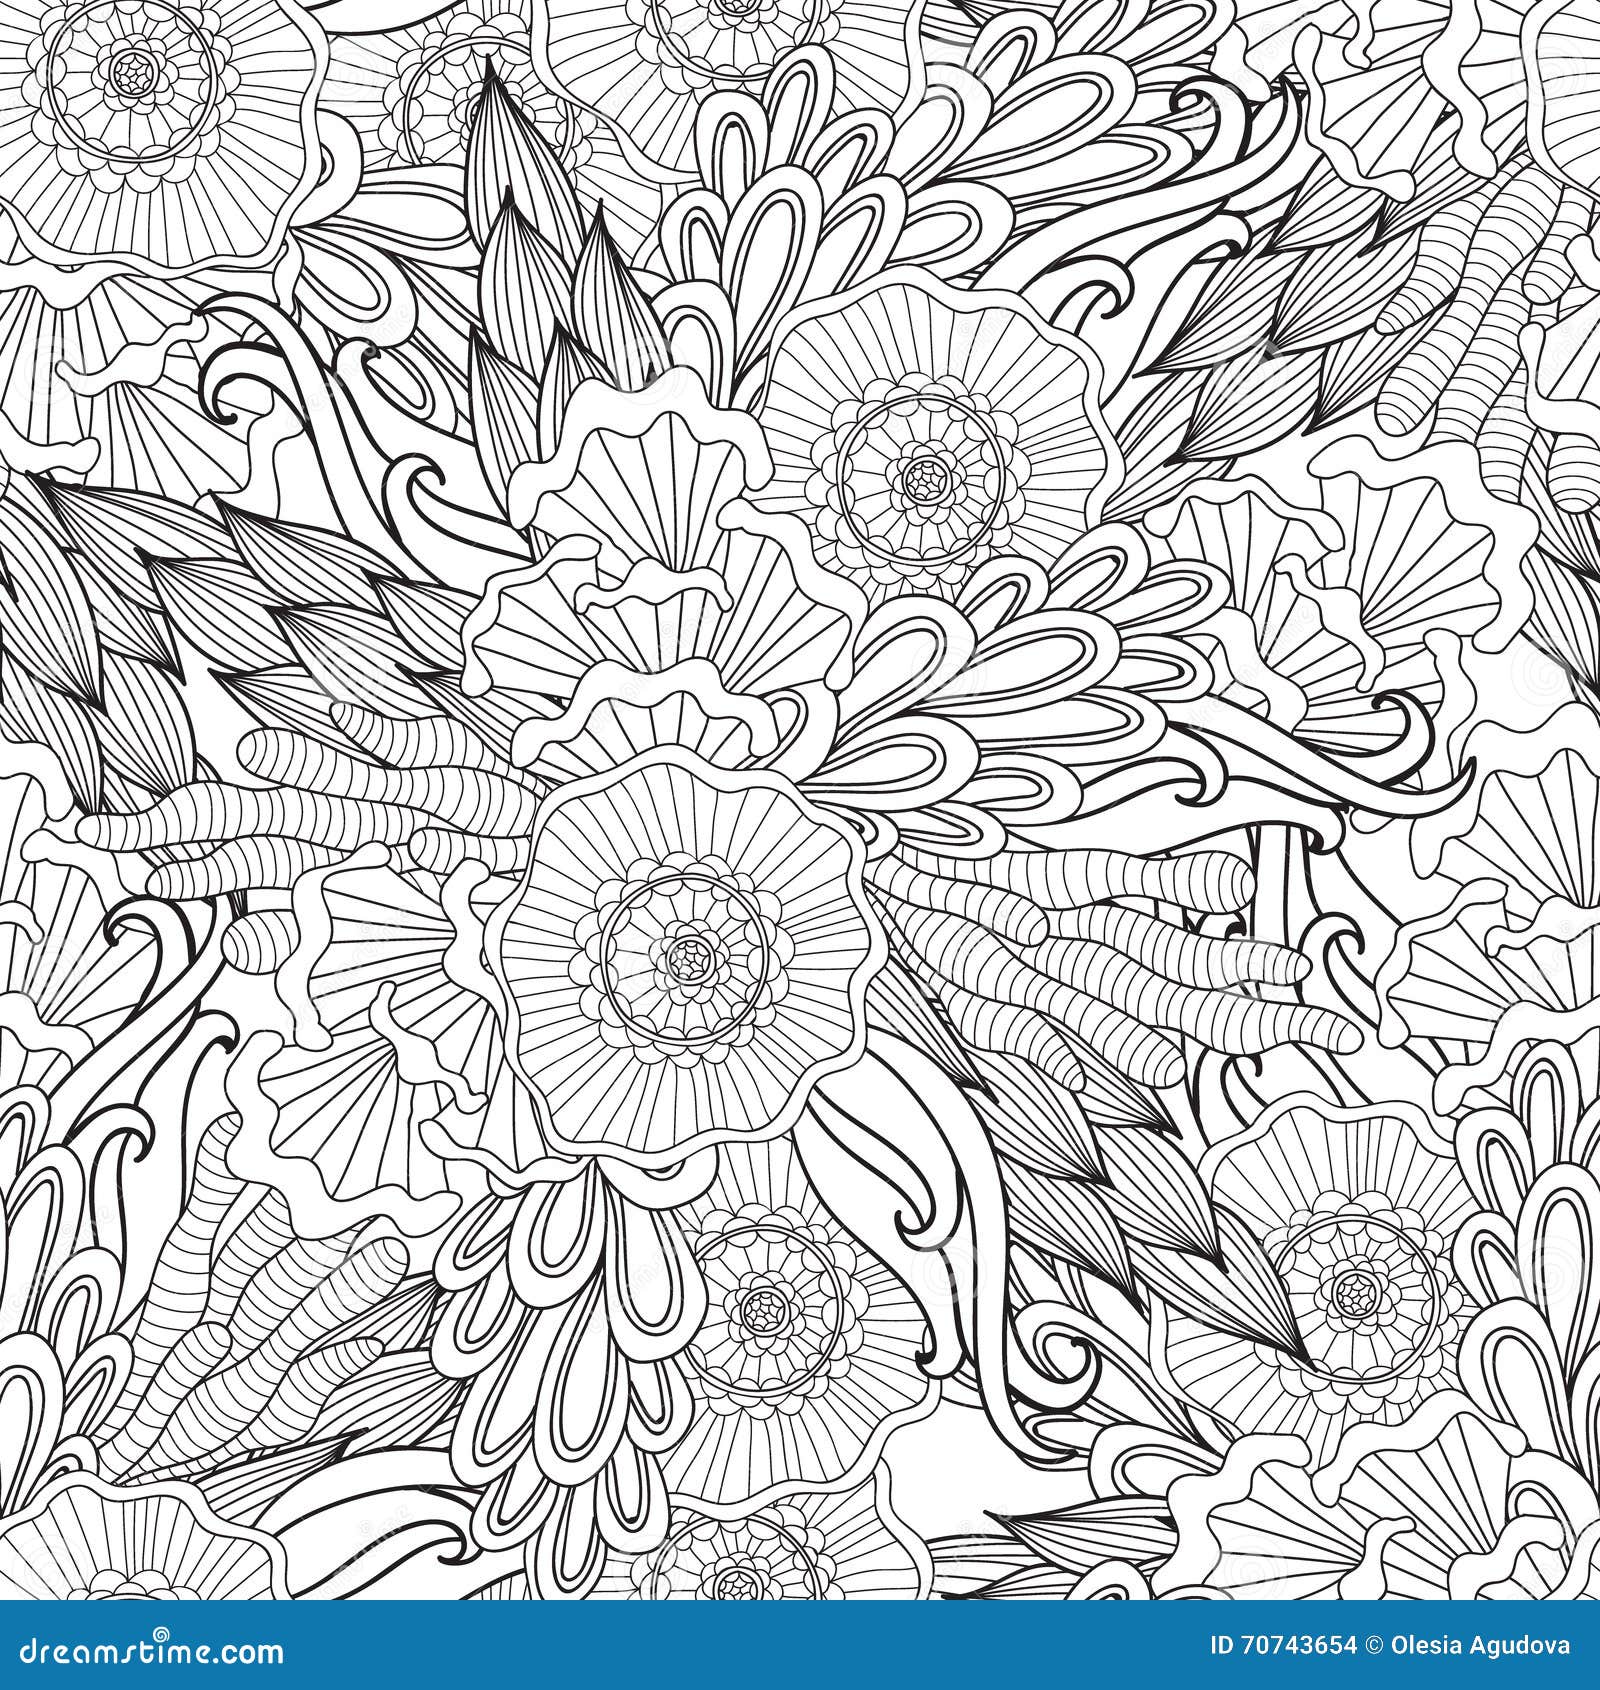 Pages for Adult Coloring Book. Hand Drawn Artistic Ethnic Ornamental ...